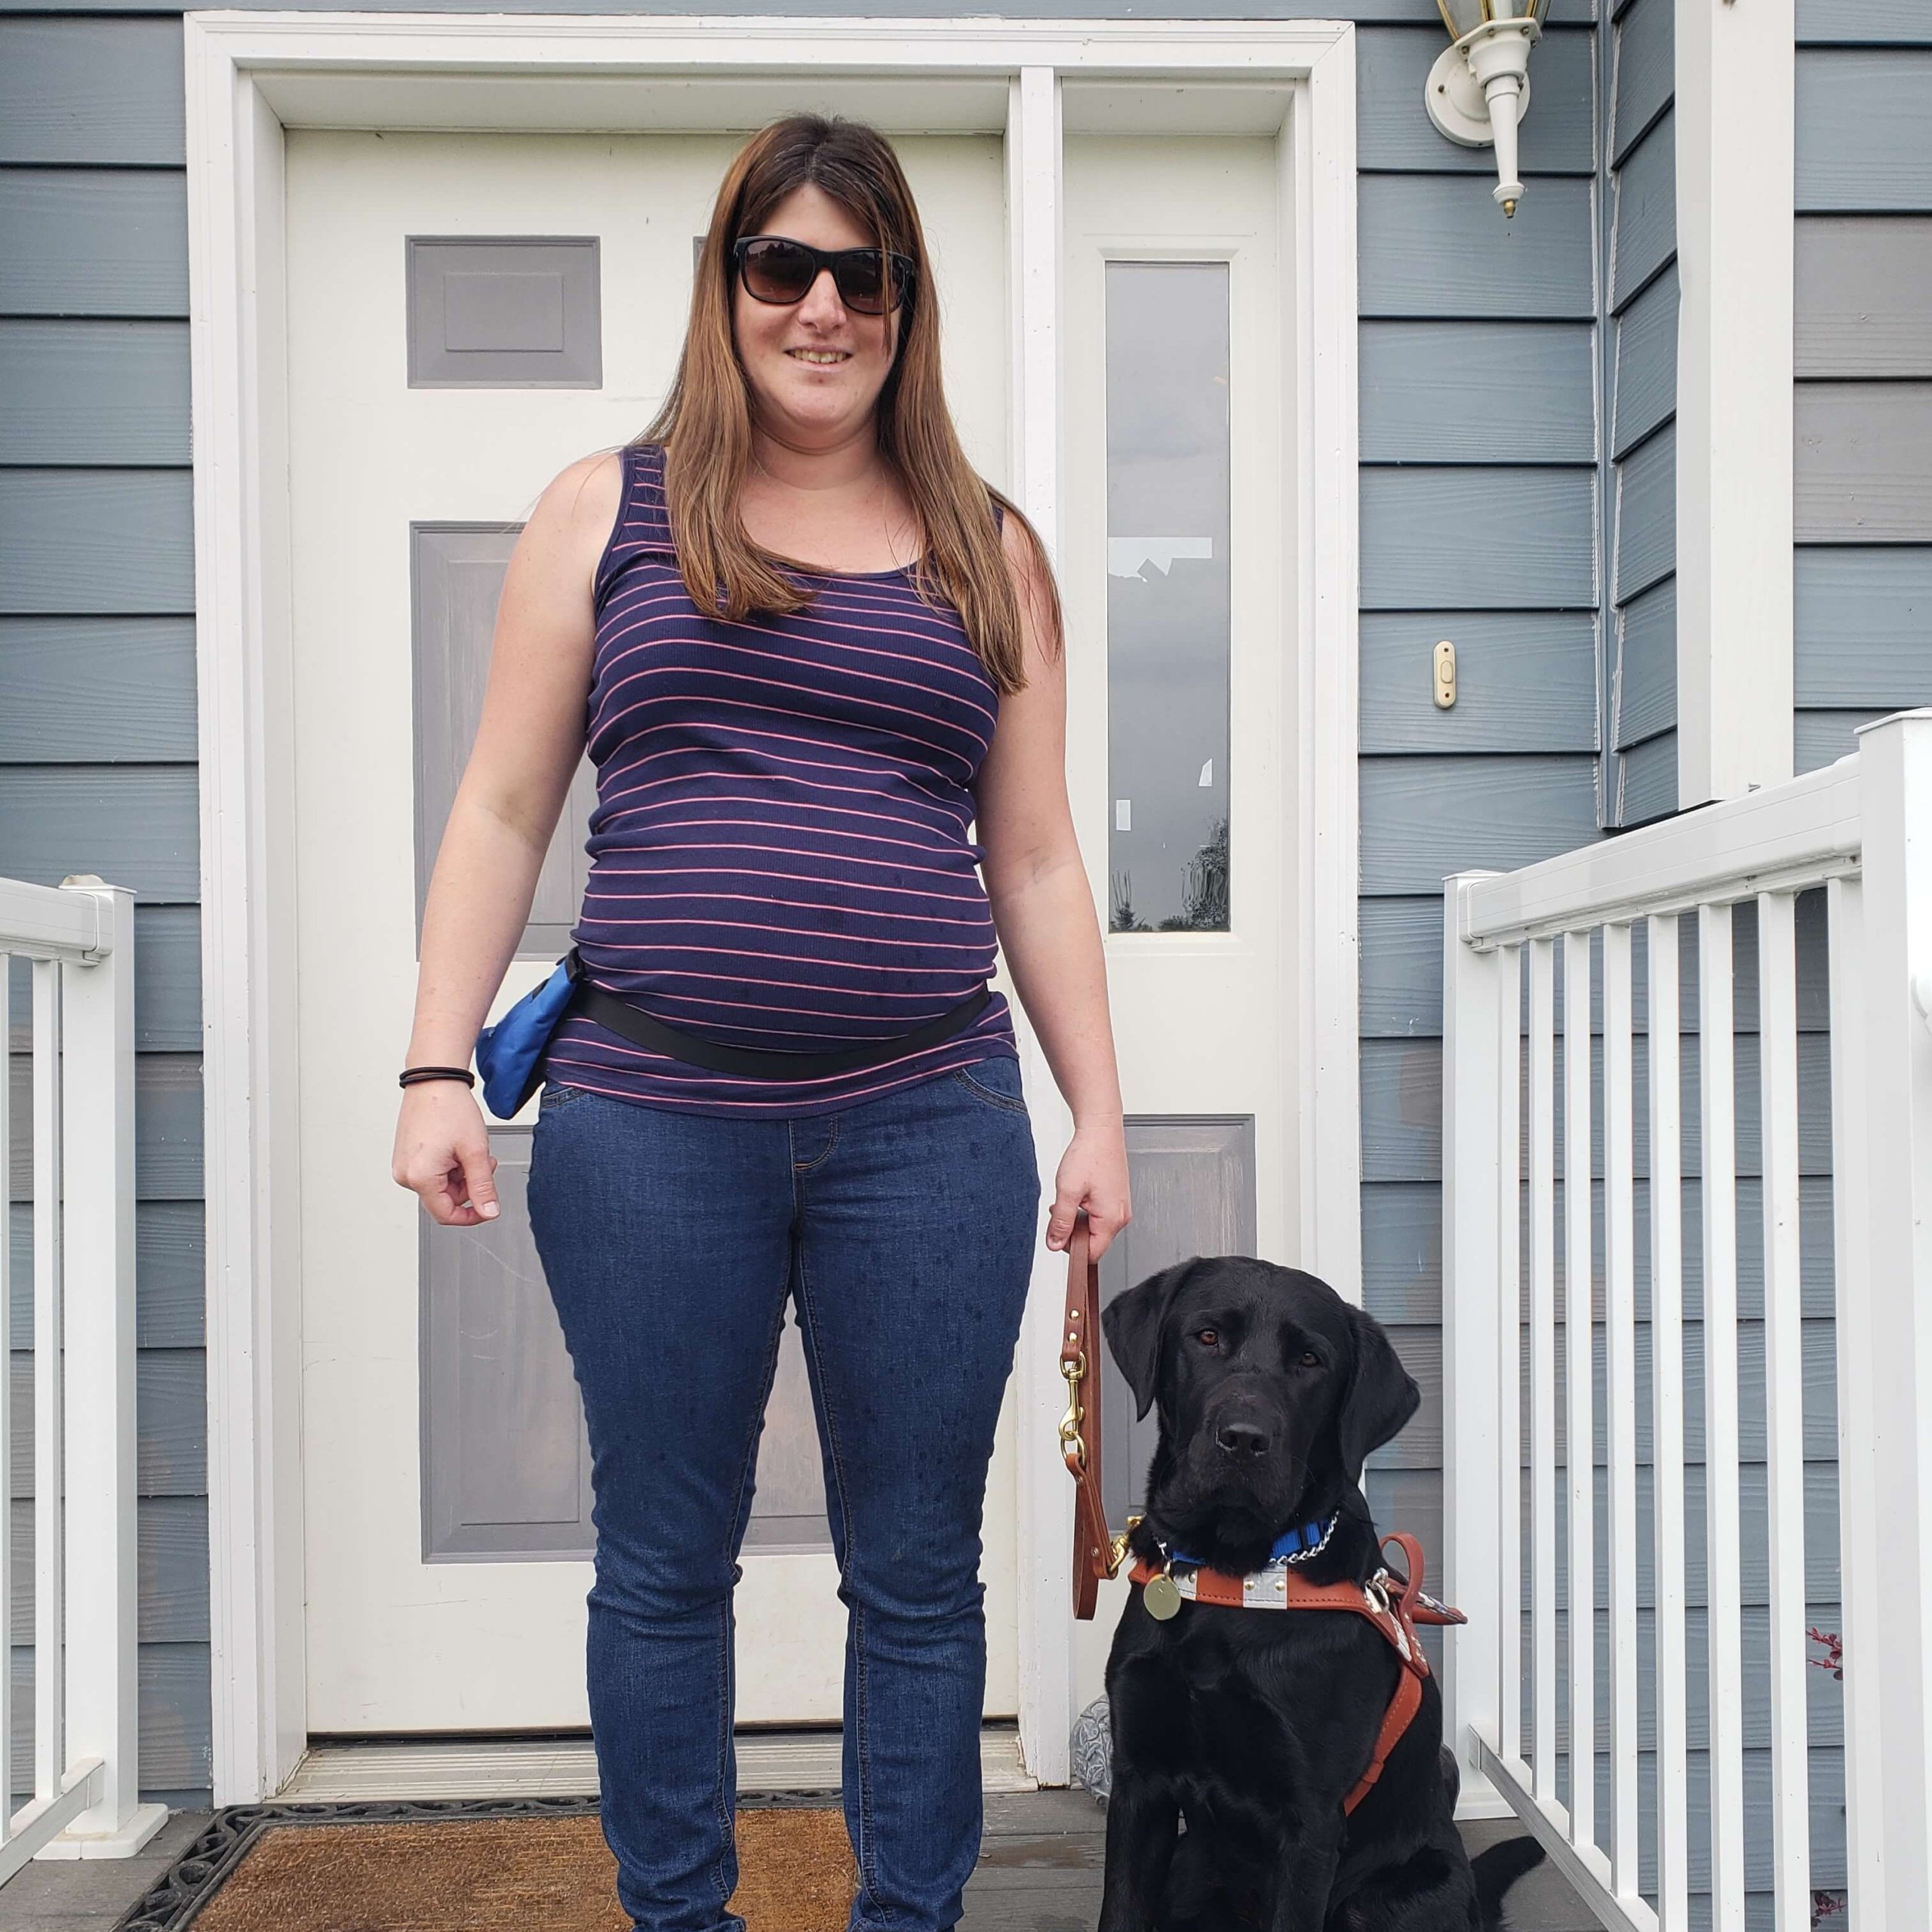 Graduate Kayla and guide dog Julie stand outside on a porch and smile for a photo